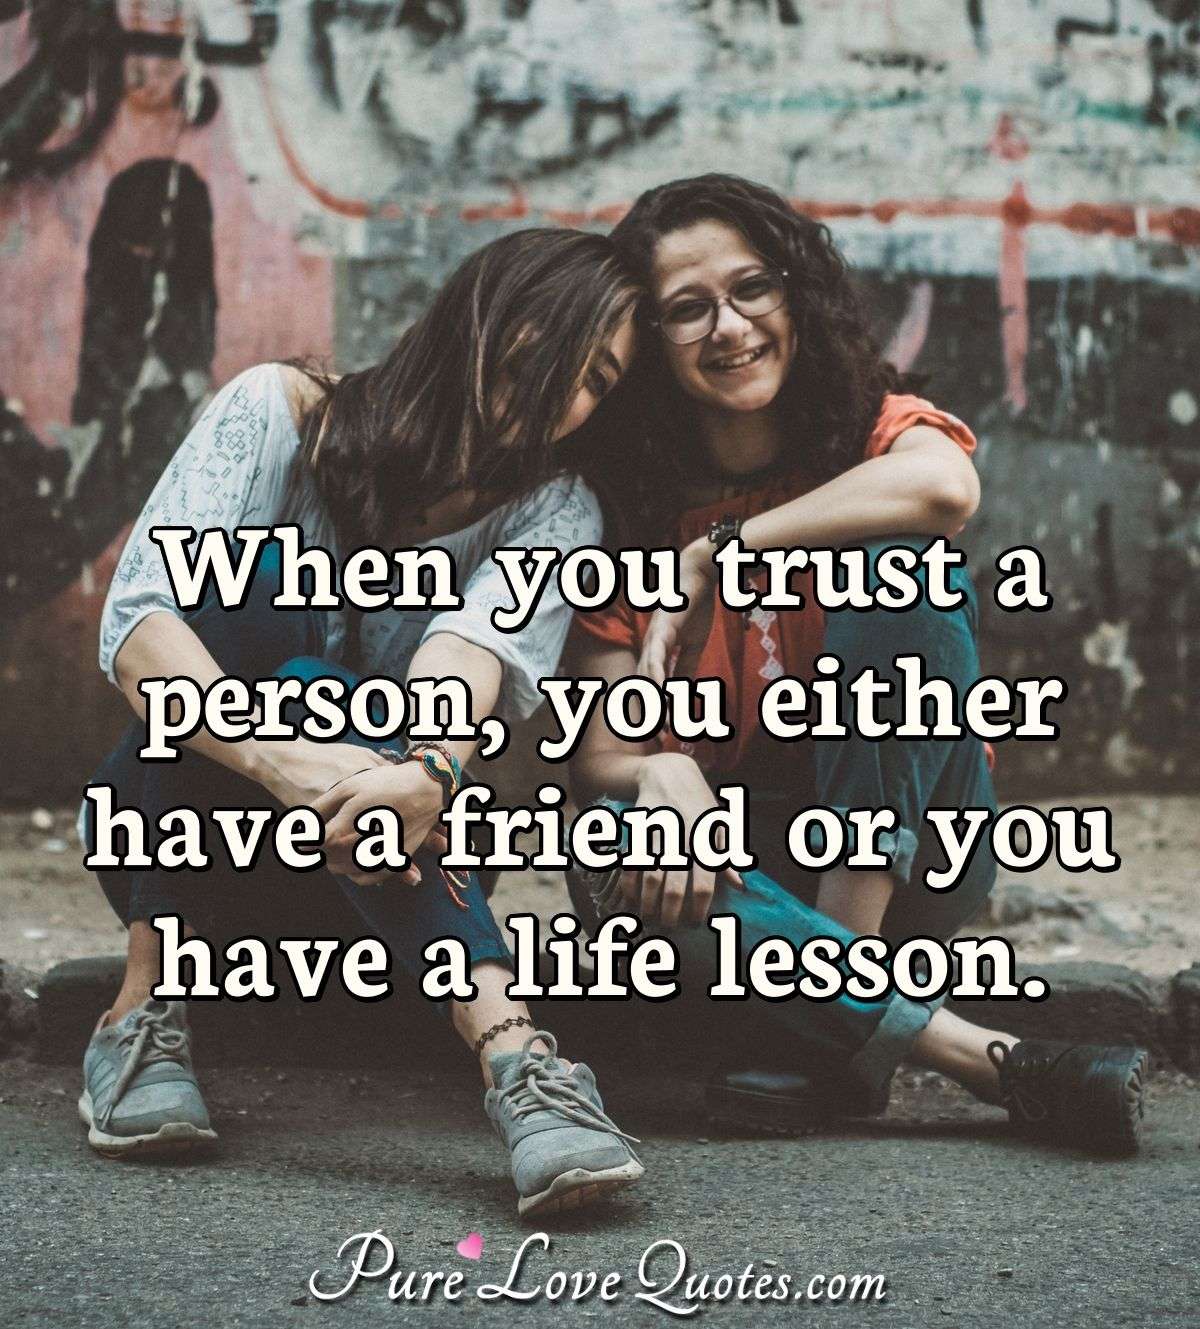 QUOTES ABOUT LIFE LESSONS -HEARTACHES, FRIENDSHIPS, LOVE, TRUST,  FORGIVENESS 